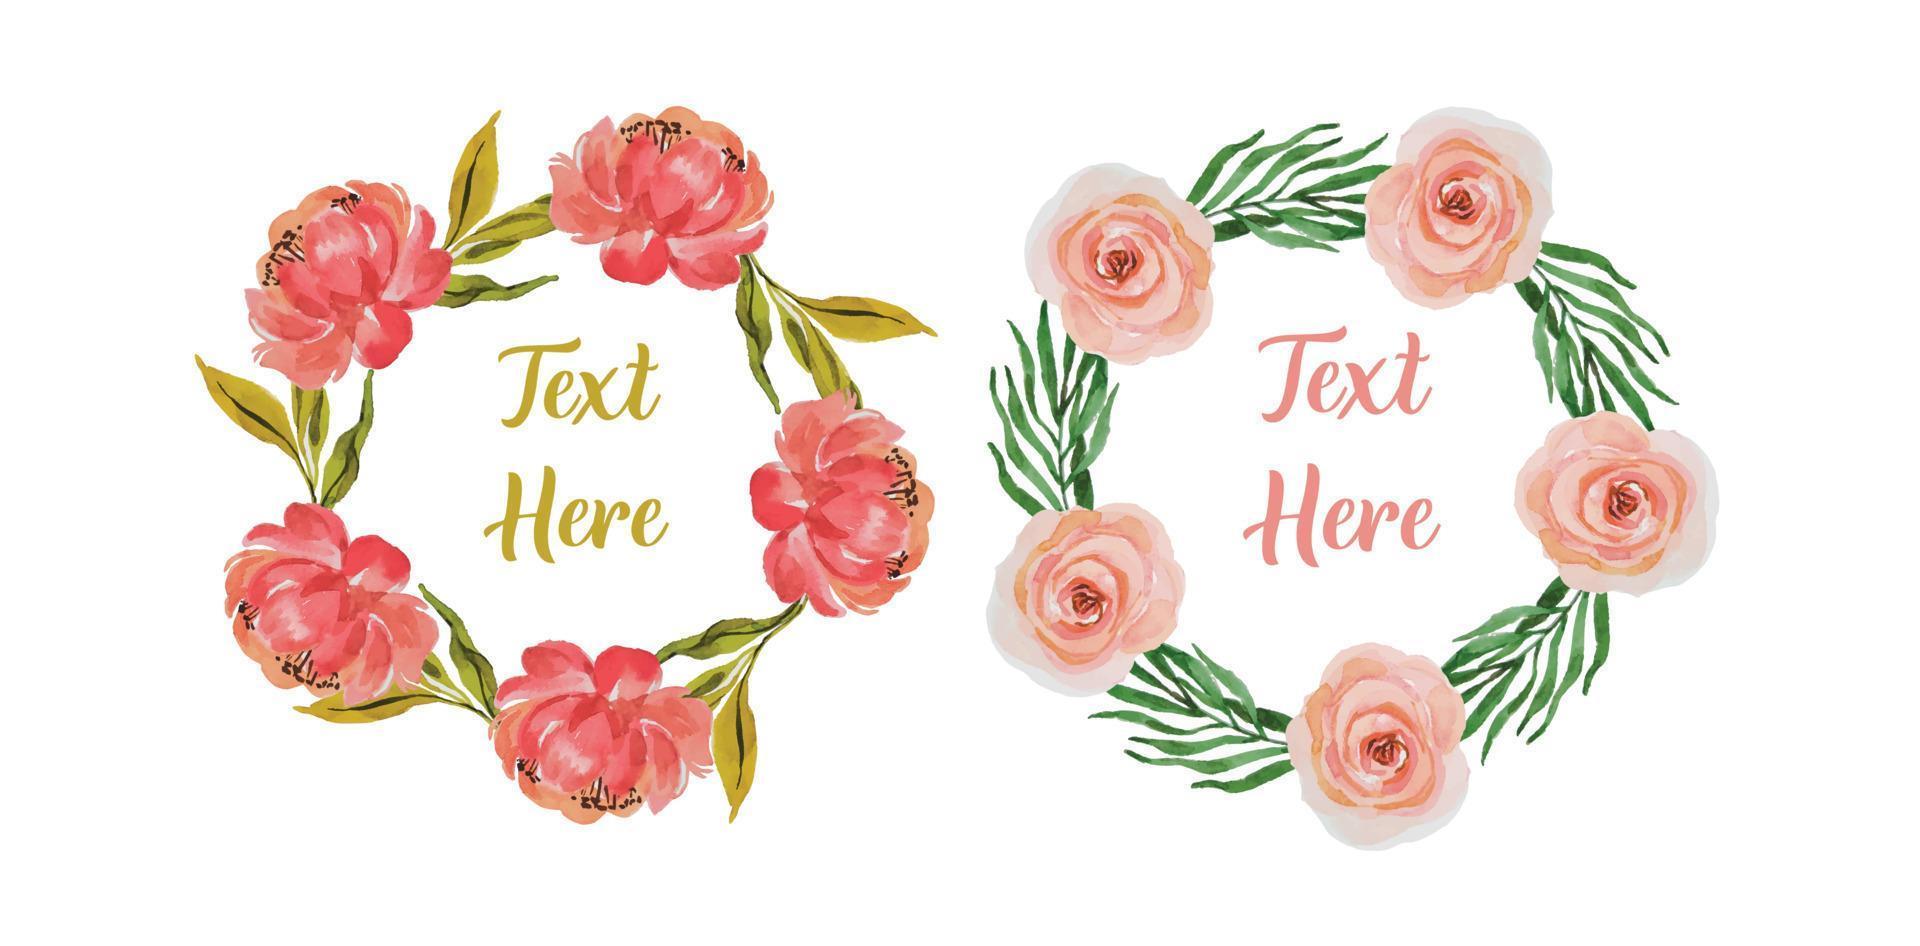 watercolor flower frame template vector